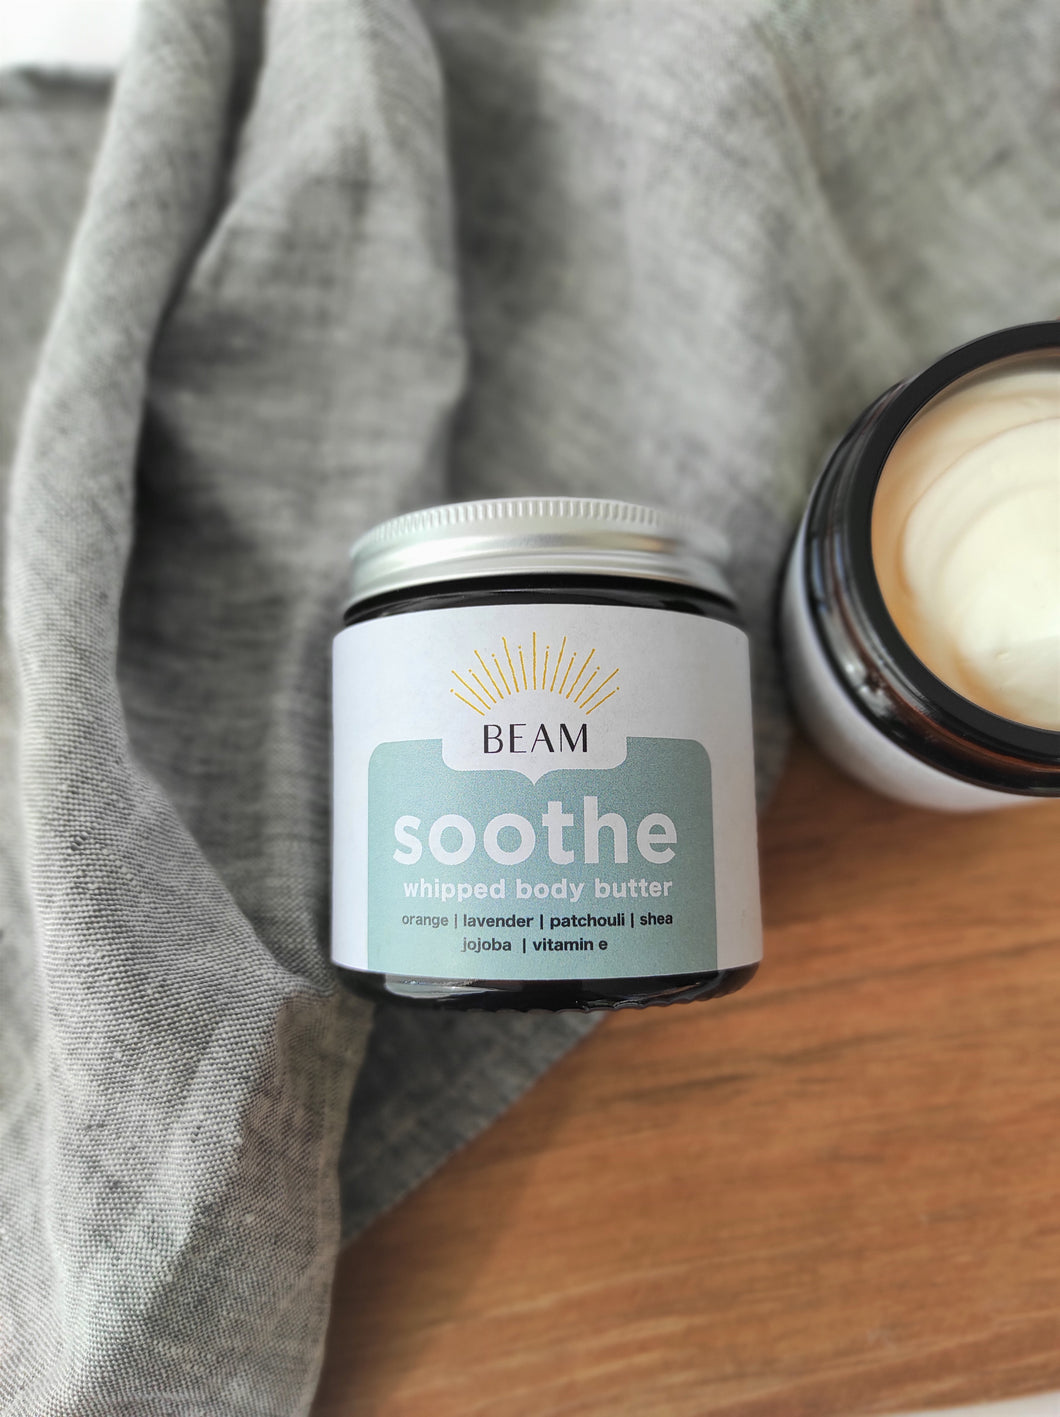 An amber glass jar of whipped body butter with silver metal lid.  The label is white and blue with soothe  printed on it and the BEAM logo.